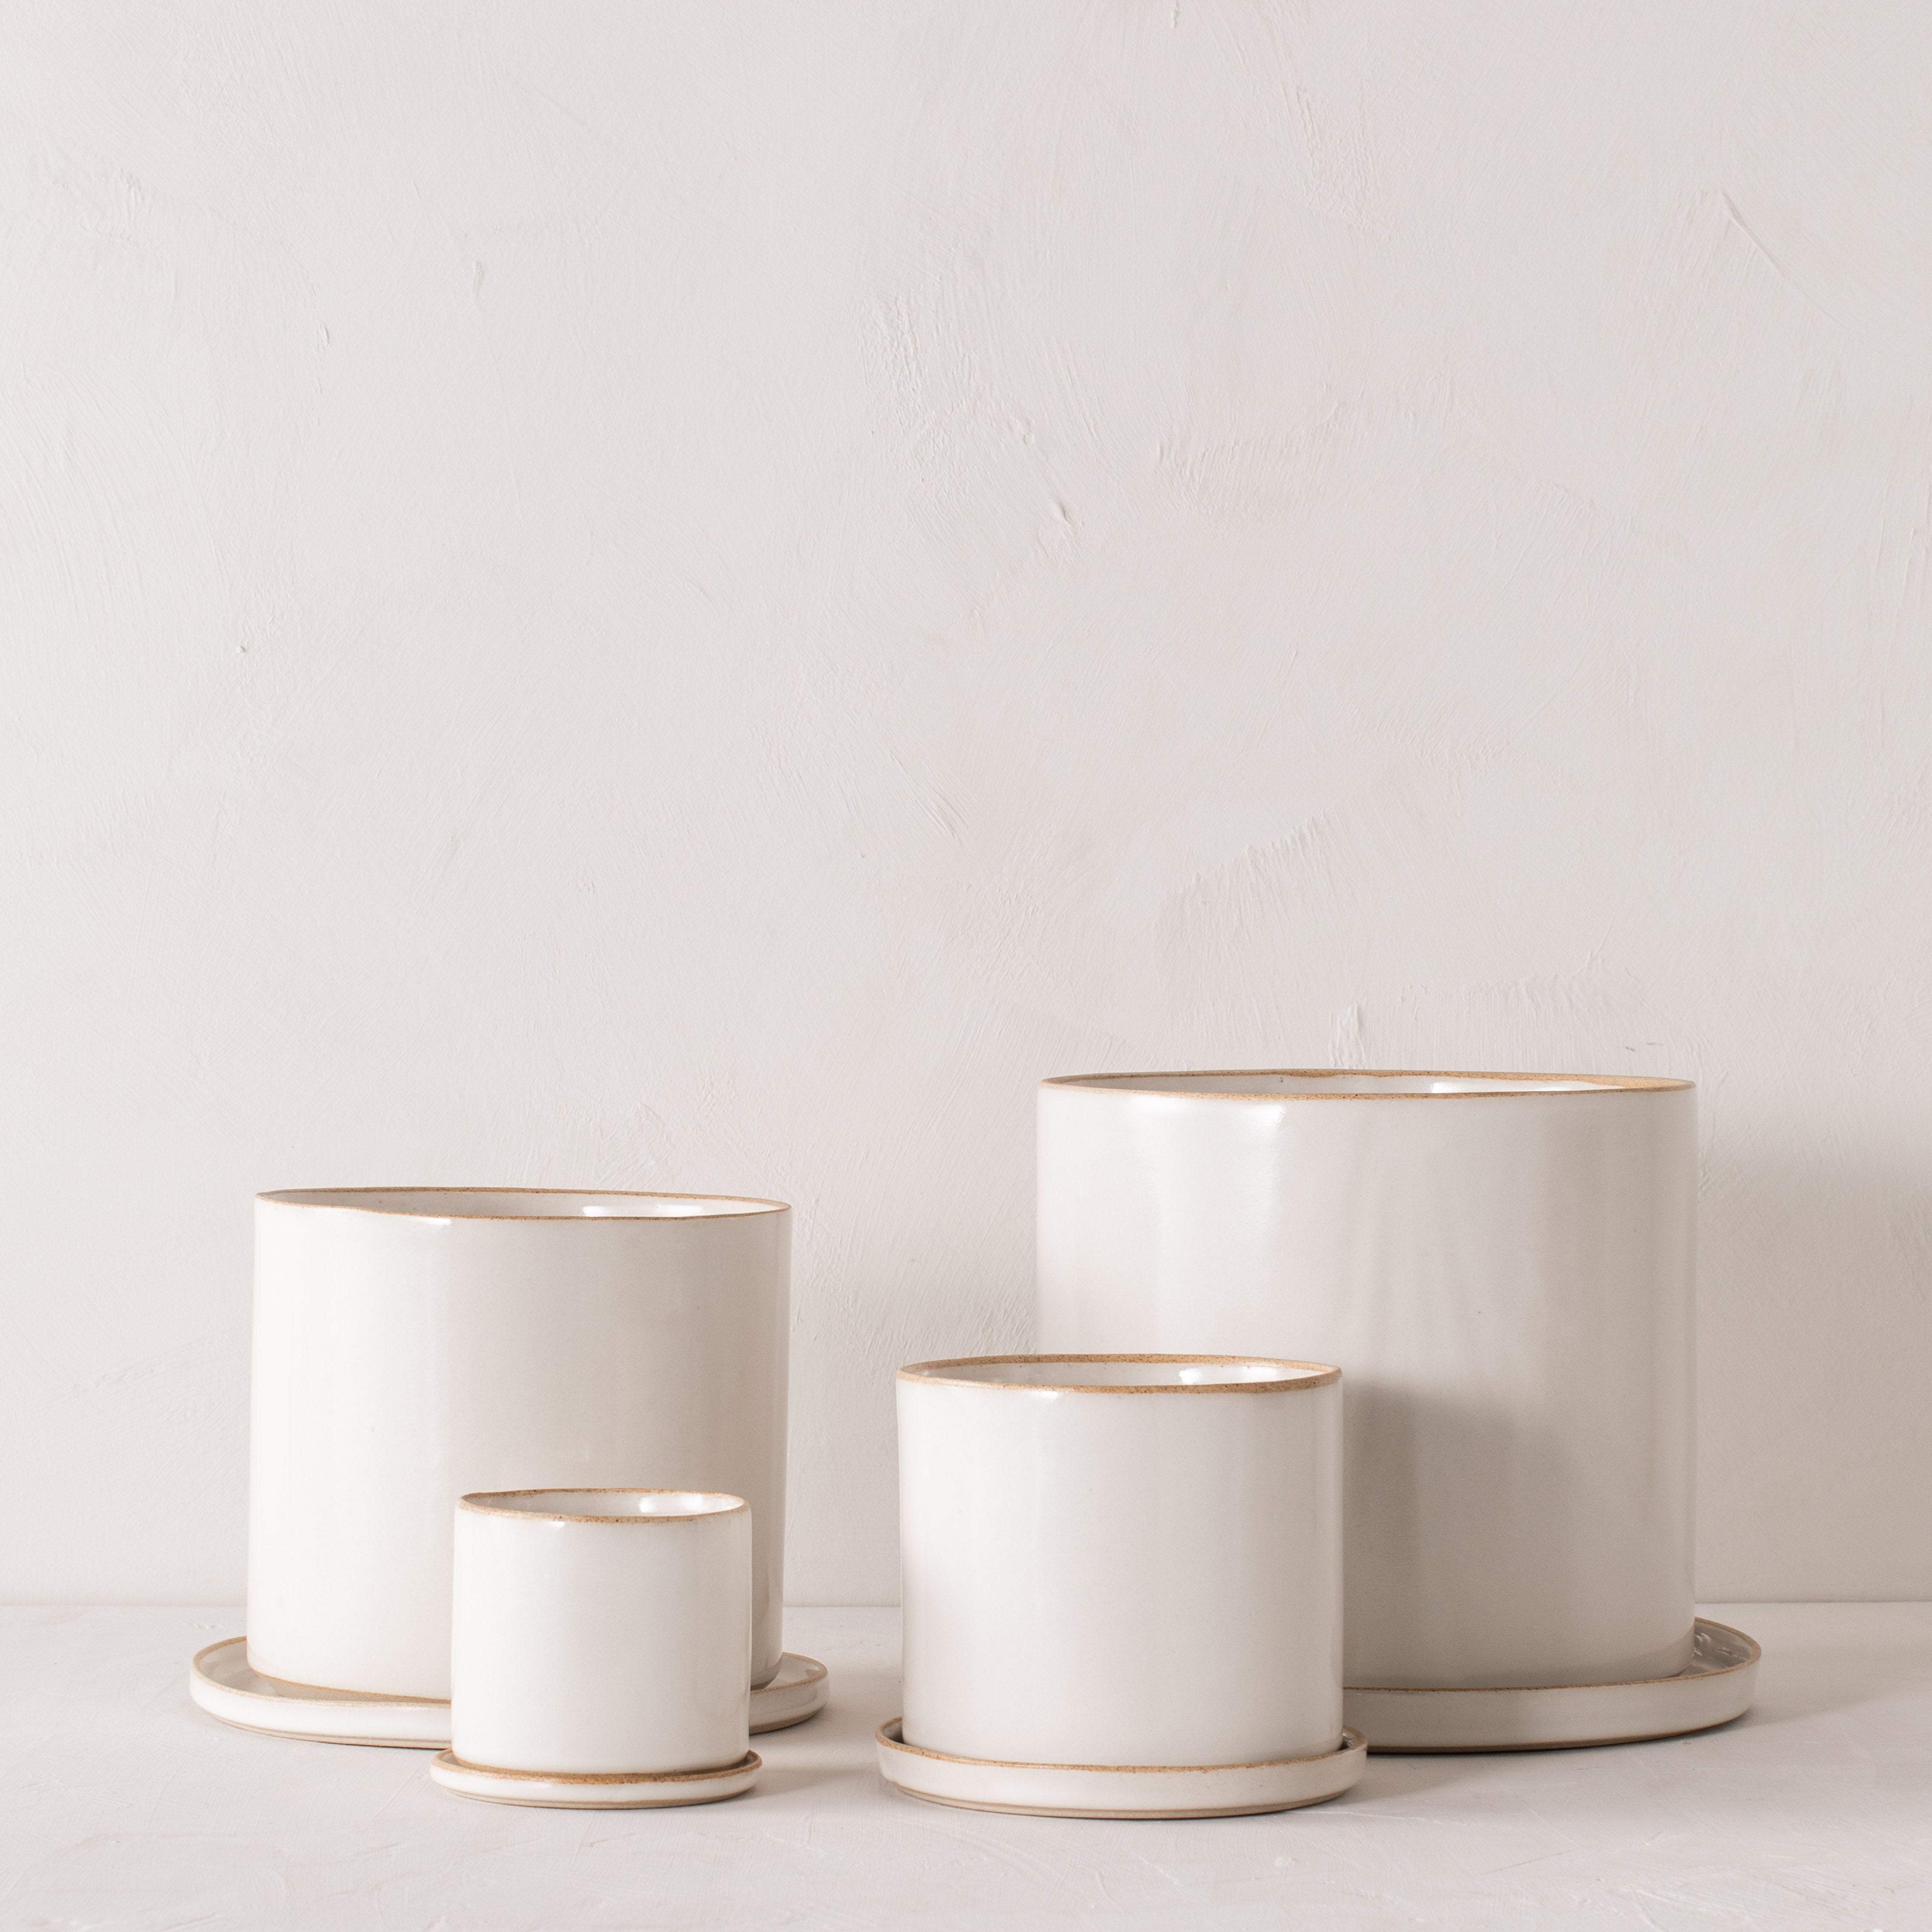 Four white ceramic planters with bottom drainage dishes, 4, 6, 8, and 10 inches. Staged on a white plaster textured tabletop against a plaster textured white wall. Designed and sold by Convivial Production, Kansas City Ceramics.